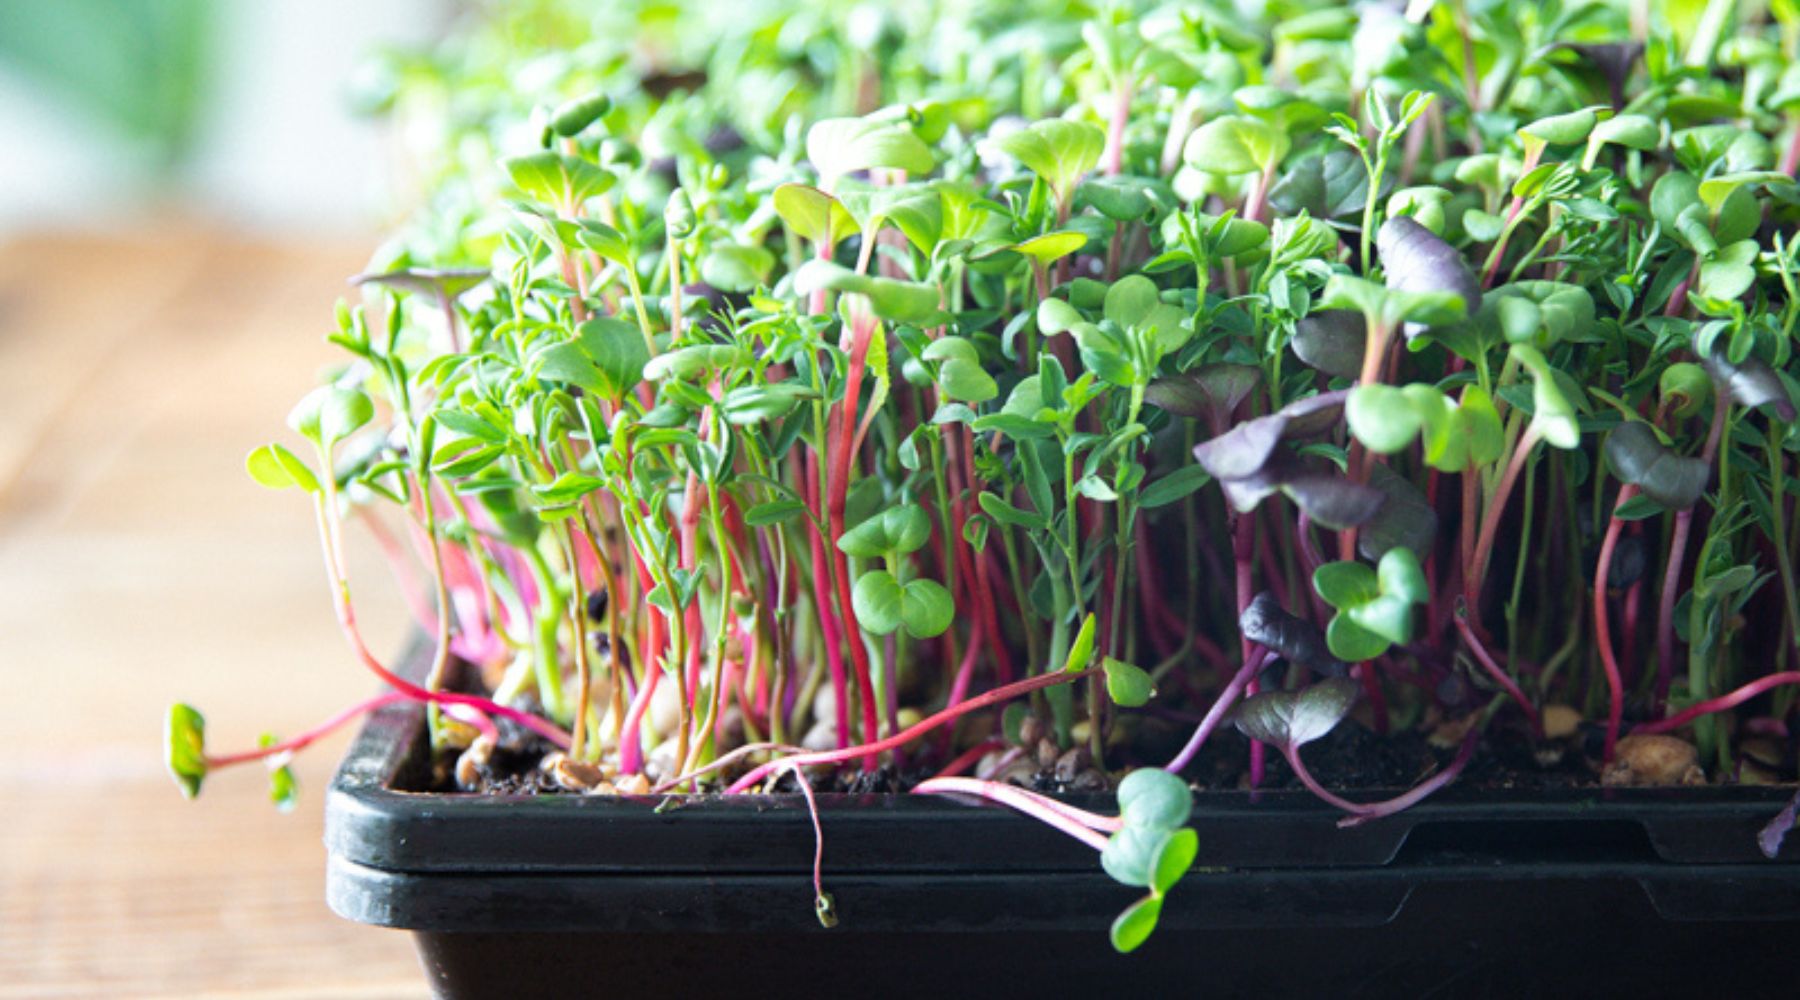 Watering Microgreens - Which Method is Best?